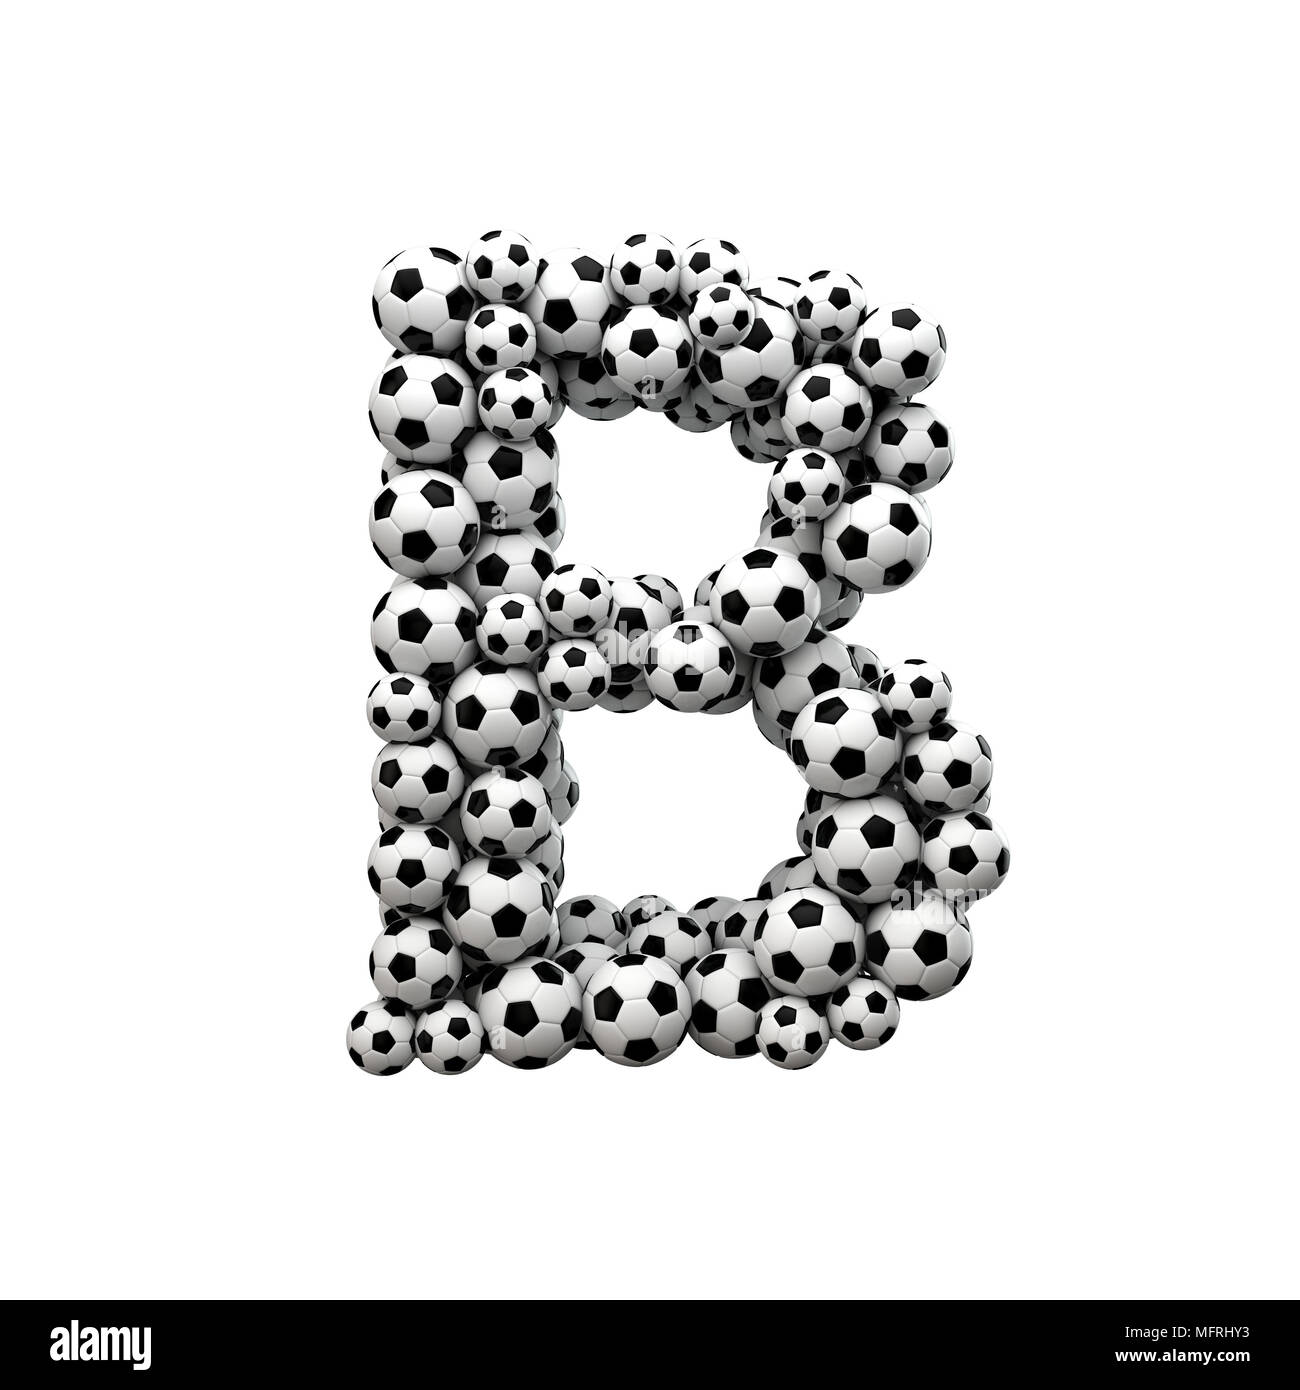 Capital letter B font made from a collection of soccer balls. 3D Rendering Stock Photo